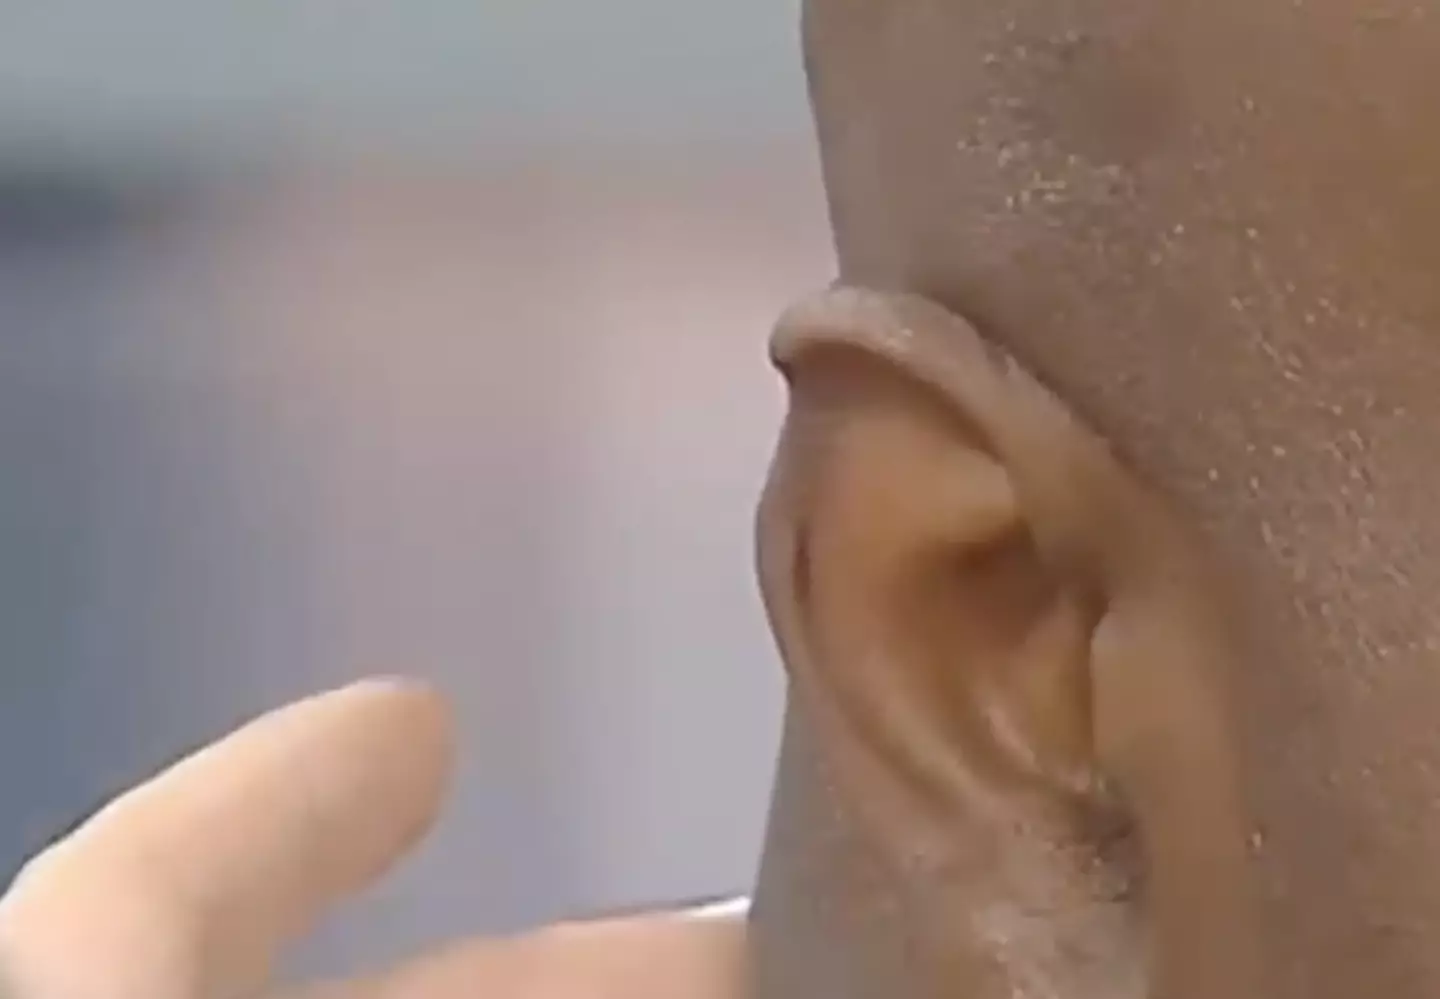 As you can see, there's definitely a chunk missing from Holyfield's ear.